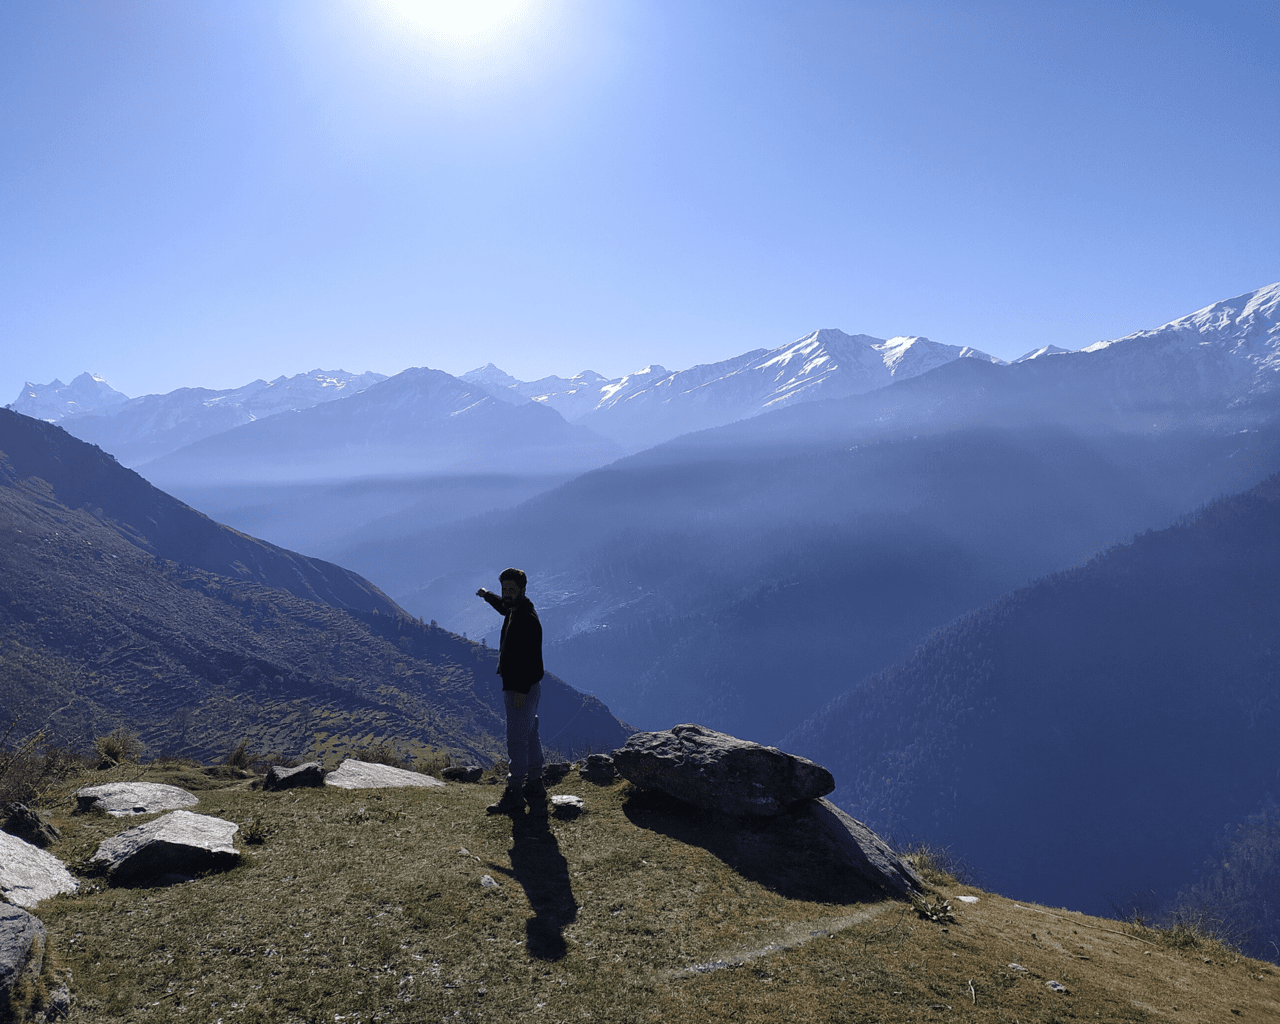 What is Uttarkashi known for